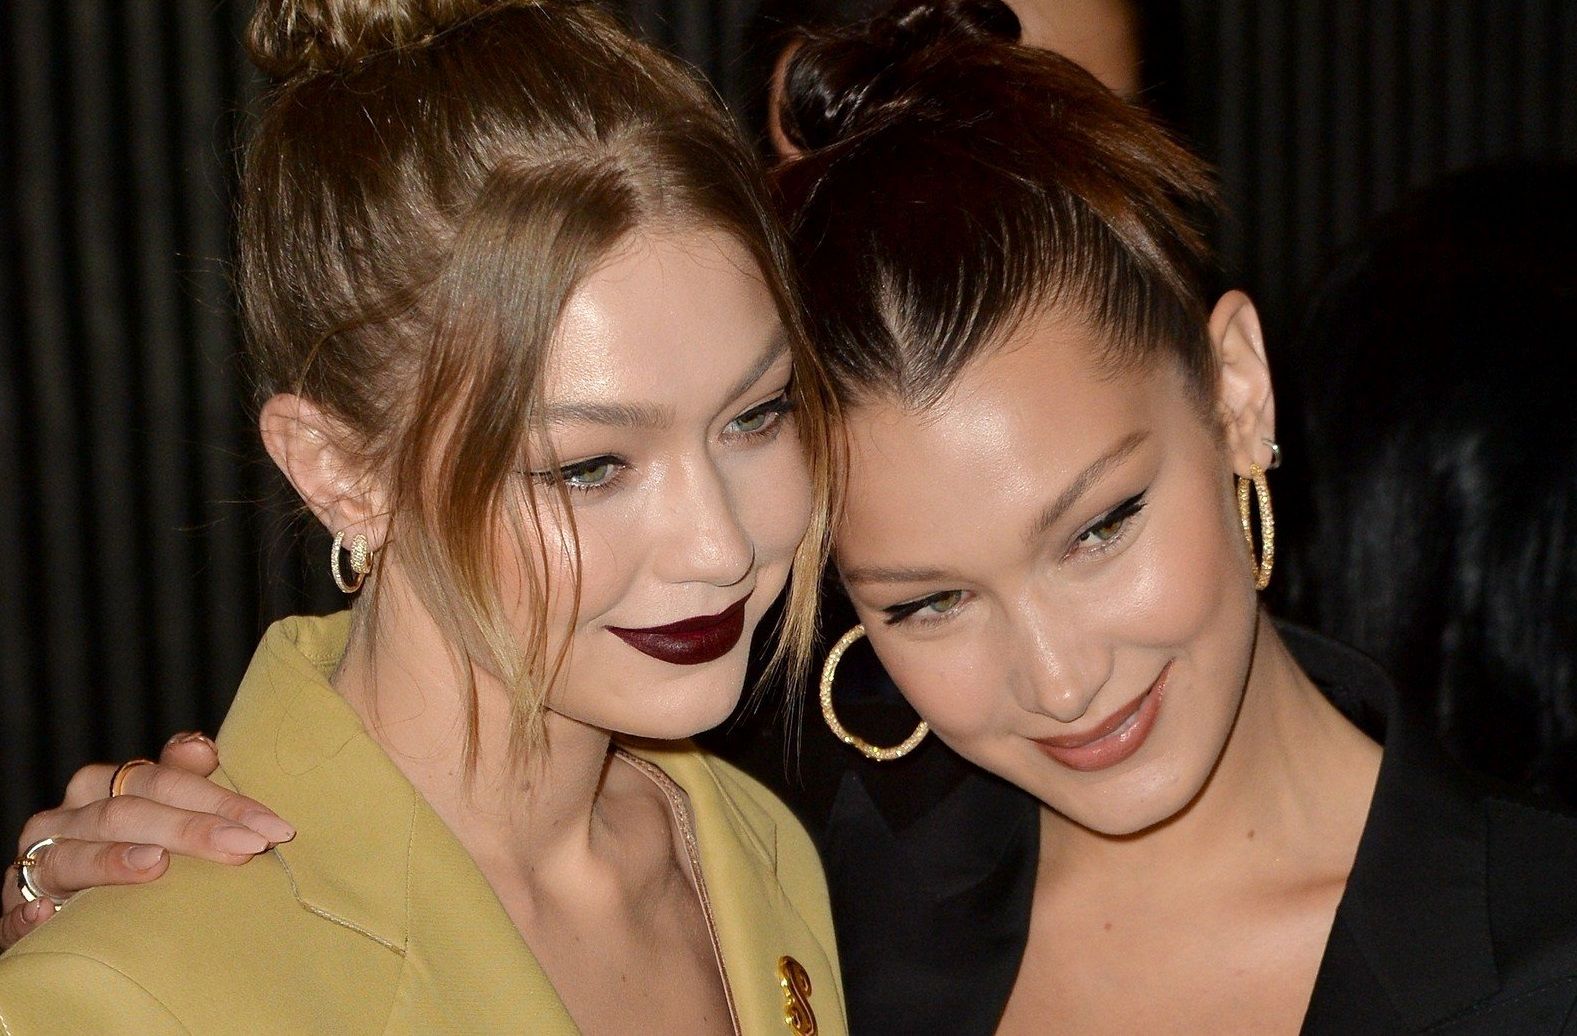 Gigi Hadid, Bella Hadid at arrivals for BEING SERENA Premiere, Time Warner Center, New, NY April 25, 2018., Image: 369719986, License: Rights-managed, Restrictions: For usage credit please use; Kristin Callahan/Everett Collection, Model Release: no, Credit line: Profimedia, Everett